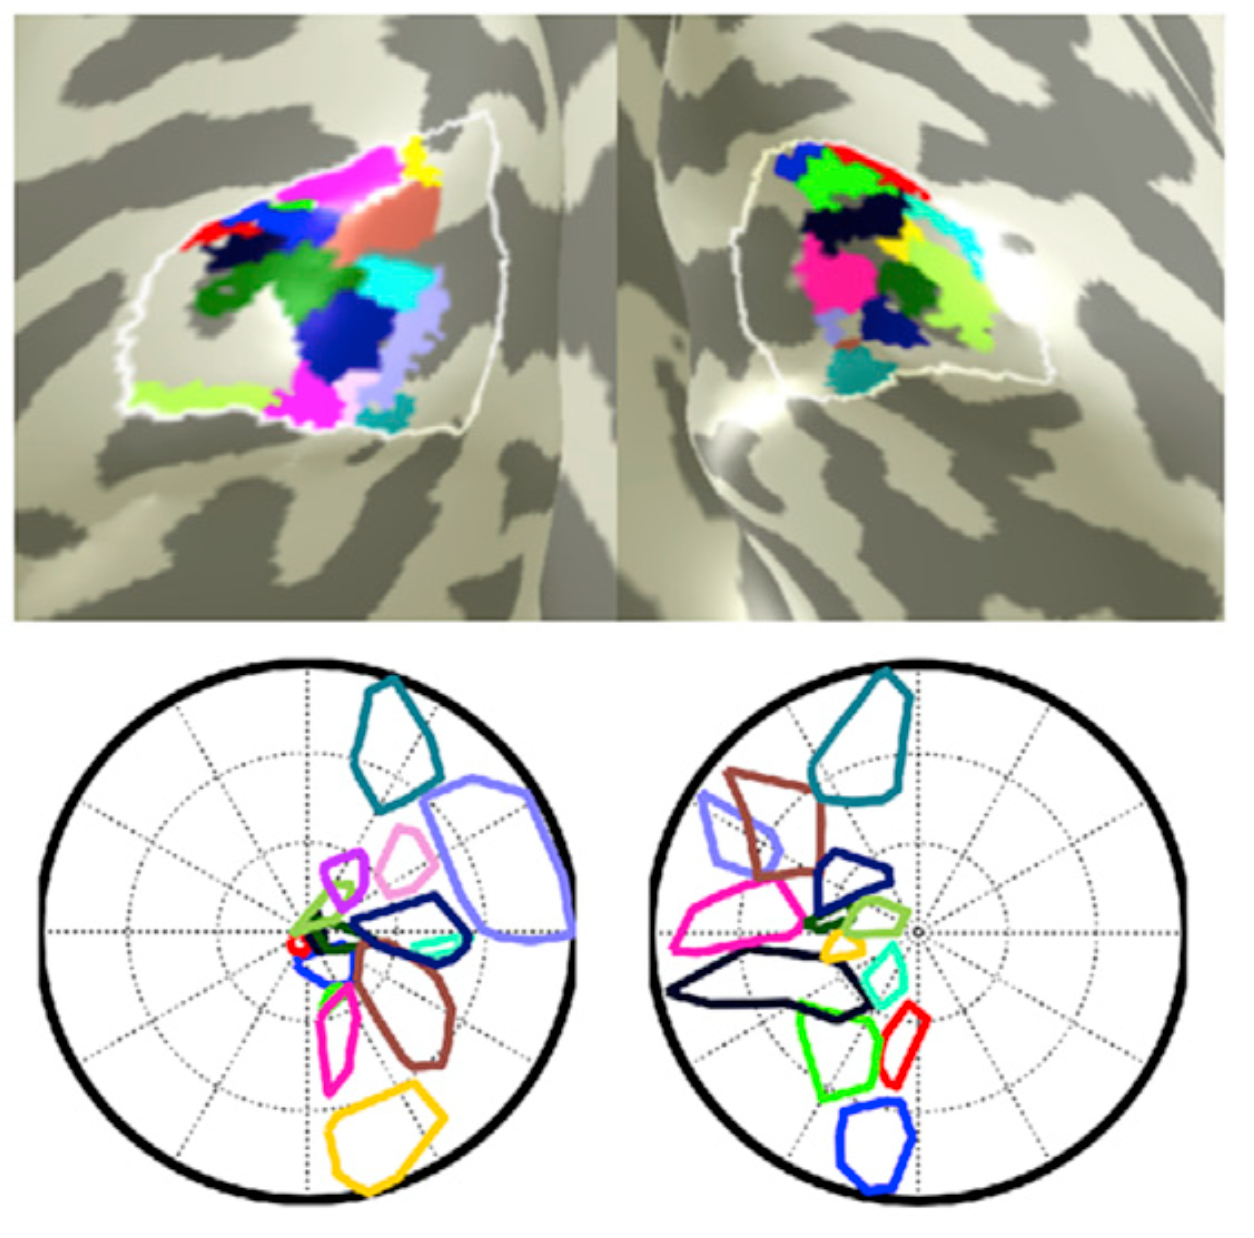 Clusters in visual cortex